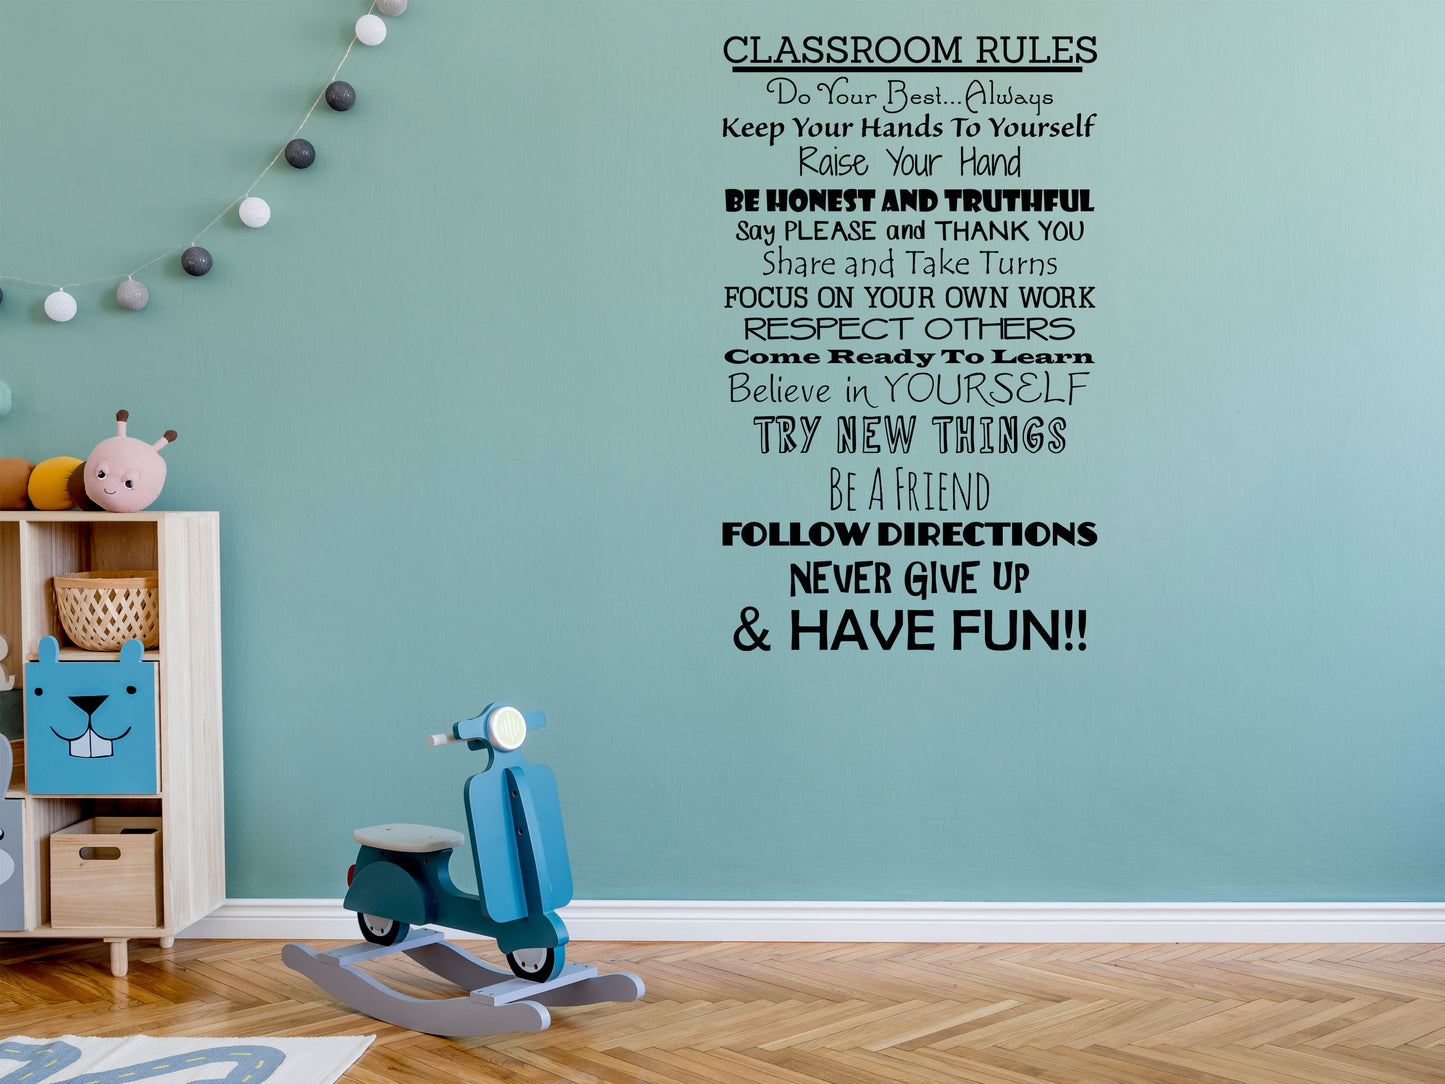 Classroom Rules Quote Sticker - Inspirational Wall Decals Vinyl Wall Decal Inspirational Wall Signs 